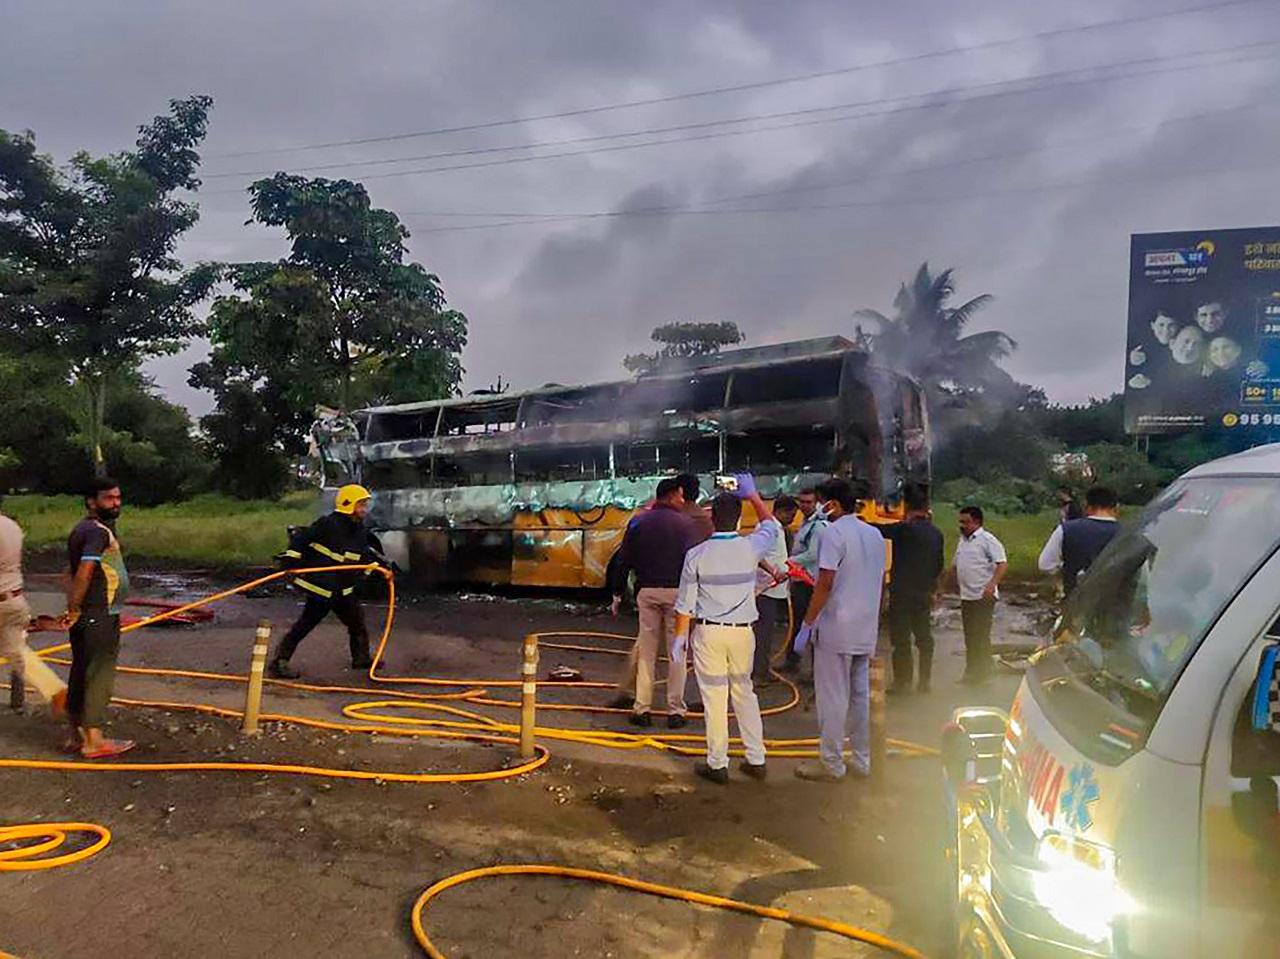 Prime Minister Narendra Modi expressed grief over the loss of lives in the bus tragedy and said ex-gratia of Rs 2 lakh would be given to the next of kin of each deceased and the injured would be given Rs 50,000 each. (Pic/Pallav Paliwal)